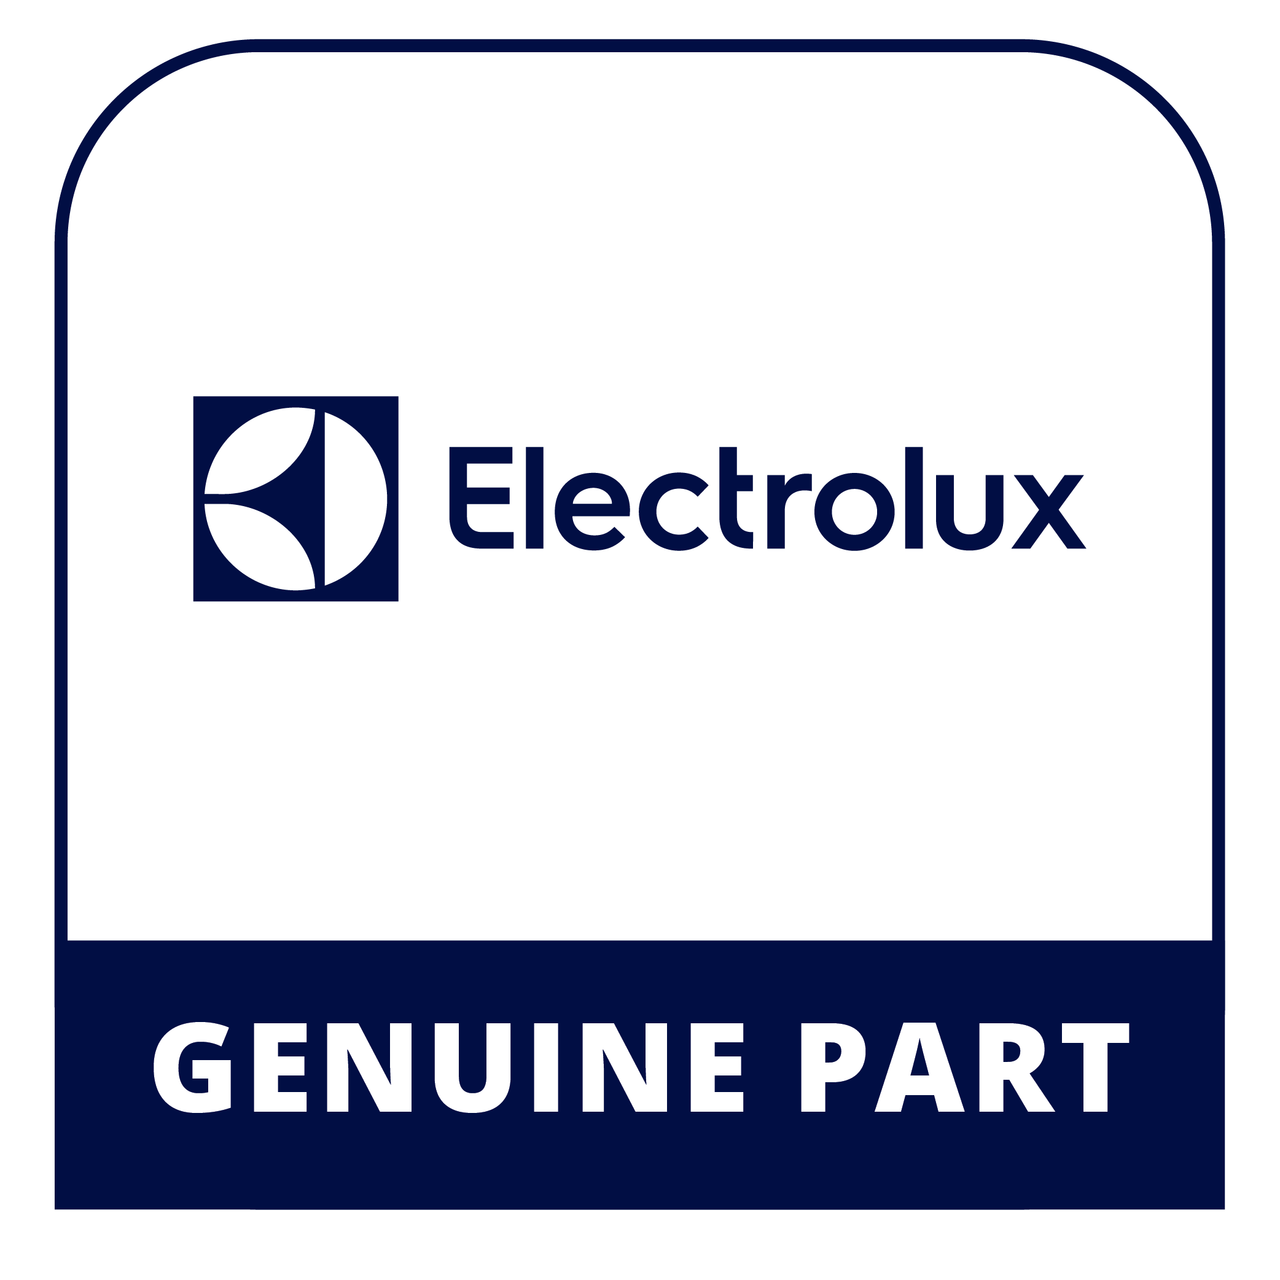 Frigidaire - Electrolux 137631200 Use And Care Guide - Genuine Electrolux Part